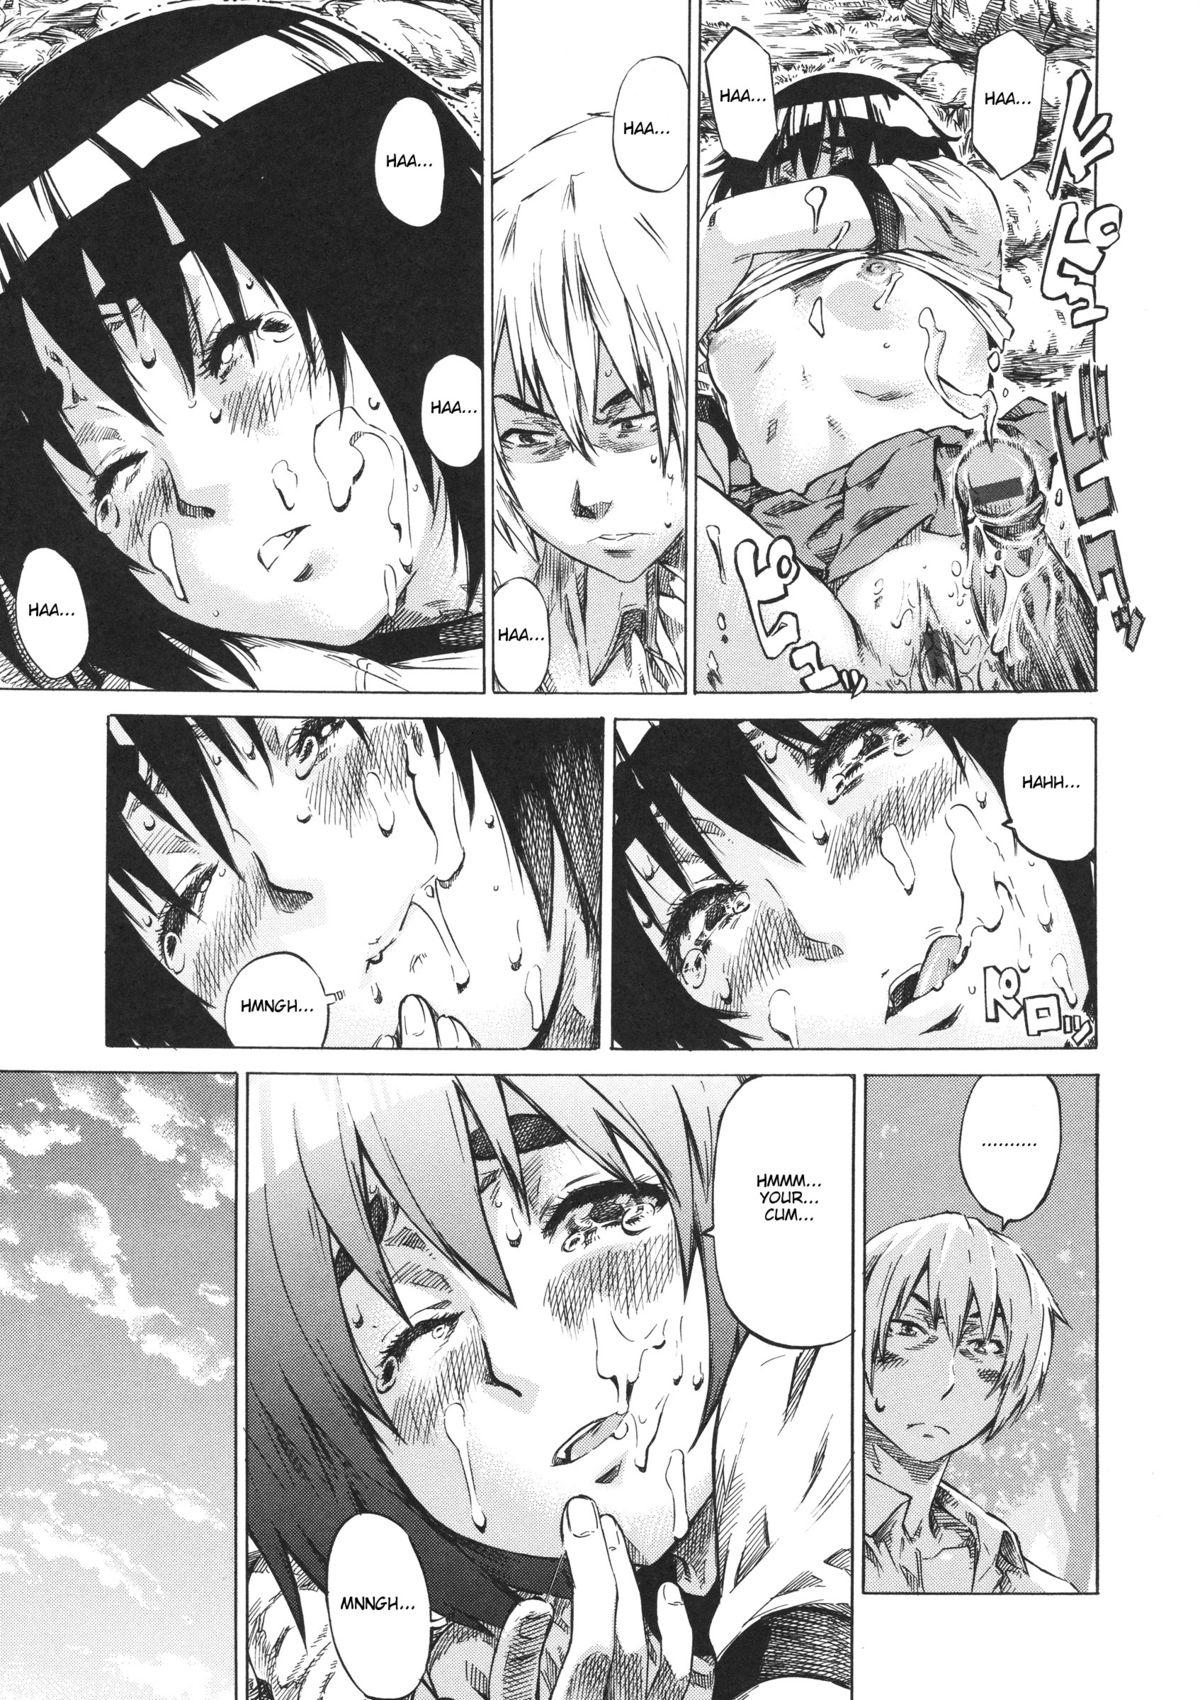 Carro Gogo wa Koucha Yori Kan Koohii De | Canned Coffee is Better than Tea in the Afternoon Super Hot Porn - Page 19